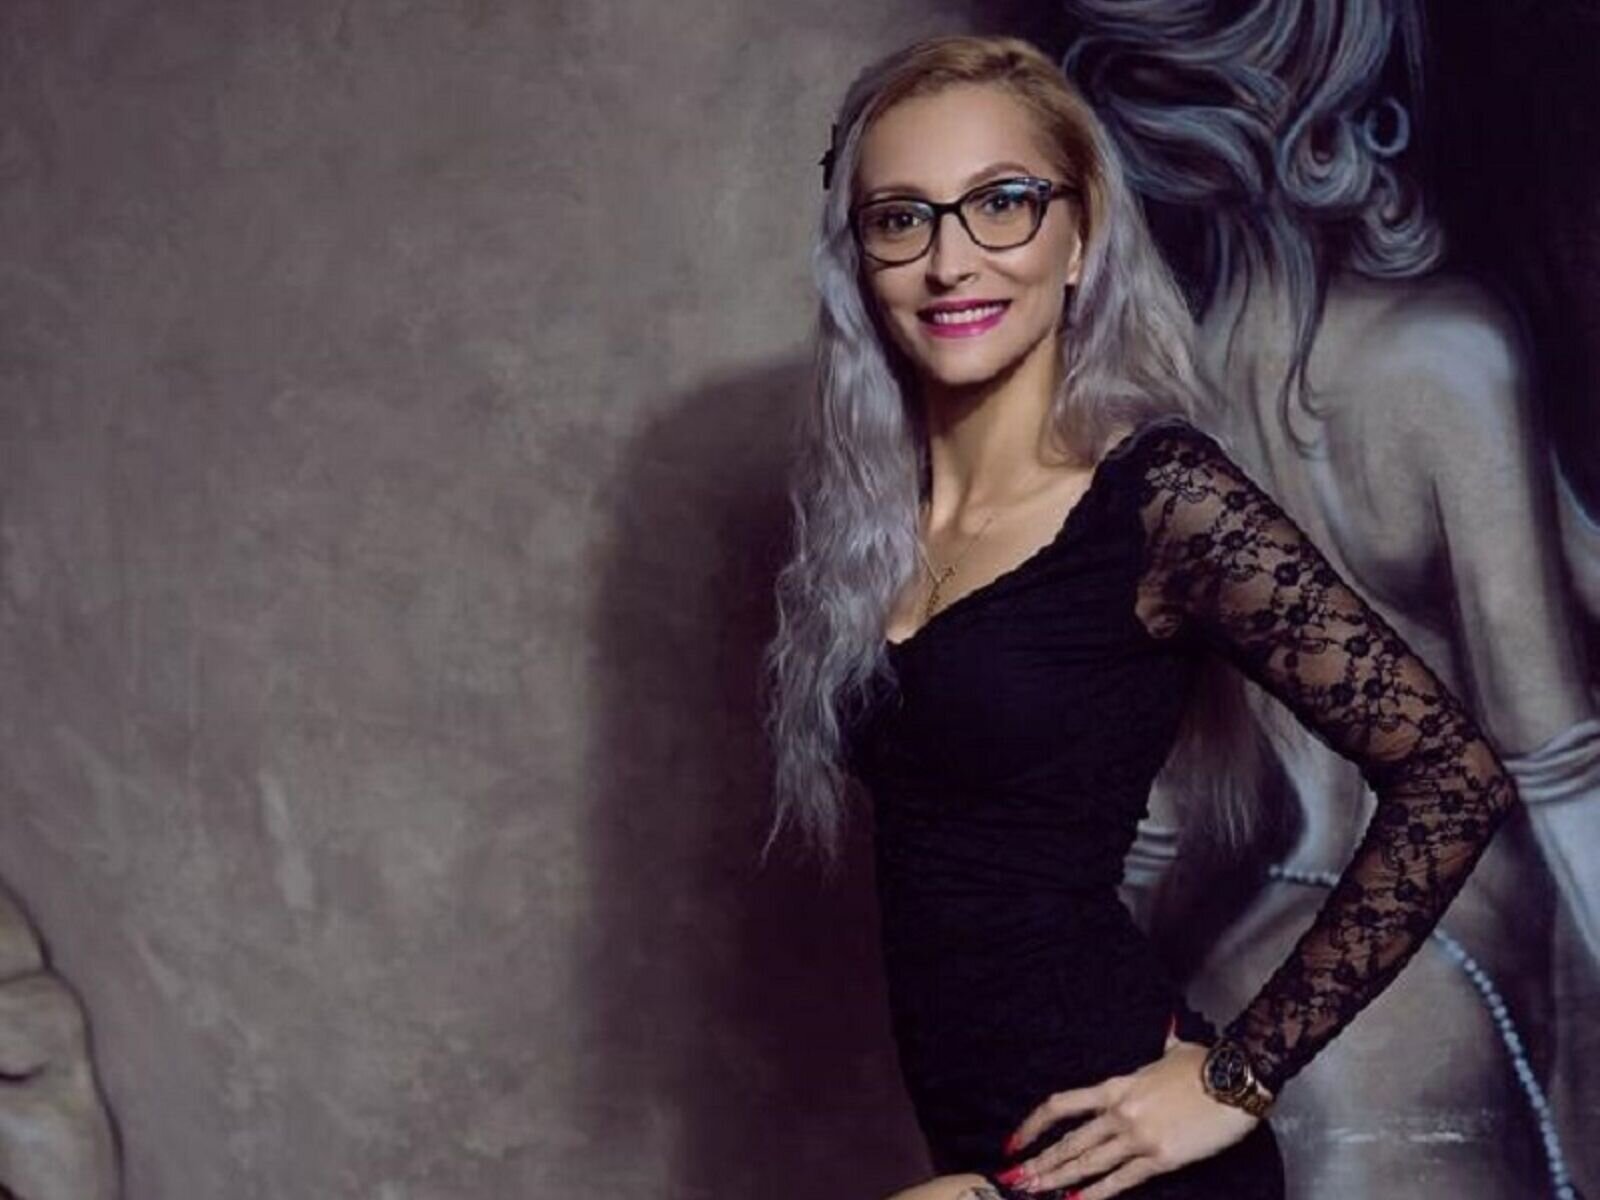 Free Live Sex Chat With ChristineBrook